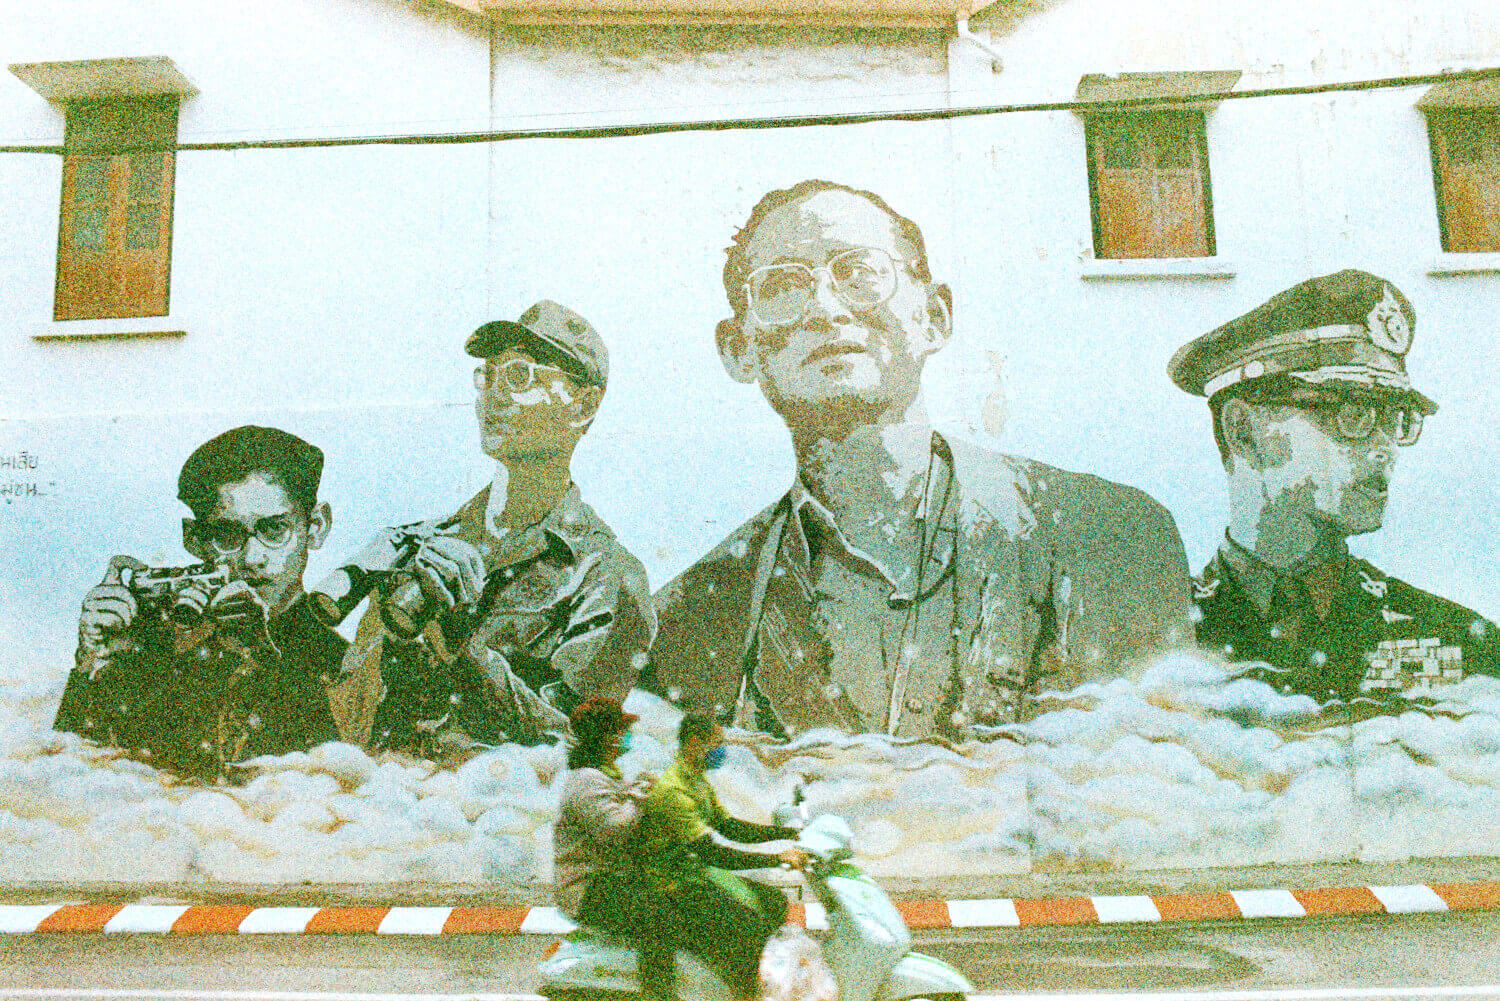 The late King Bhumibol depicted in Phuket street art: 5 Frames... With a Canon A-1 and a roll of 1987 Sainsbury's Colour Print Film (CPF) and a Canon A1 - by James Patrick